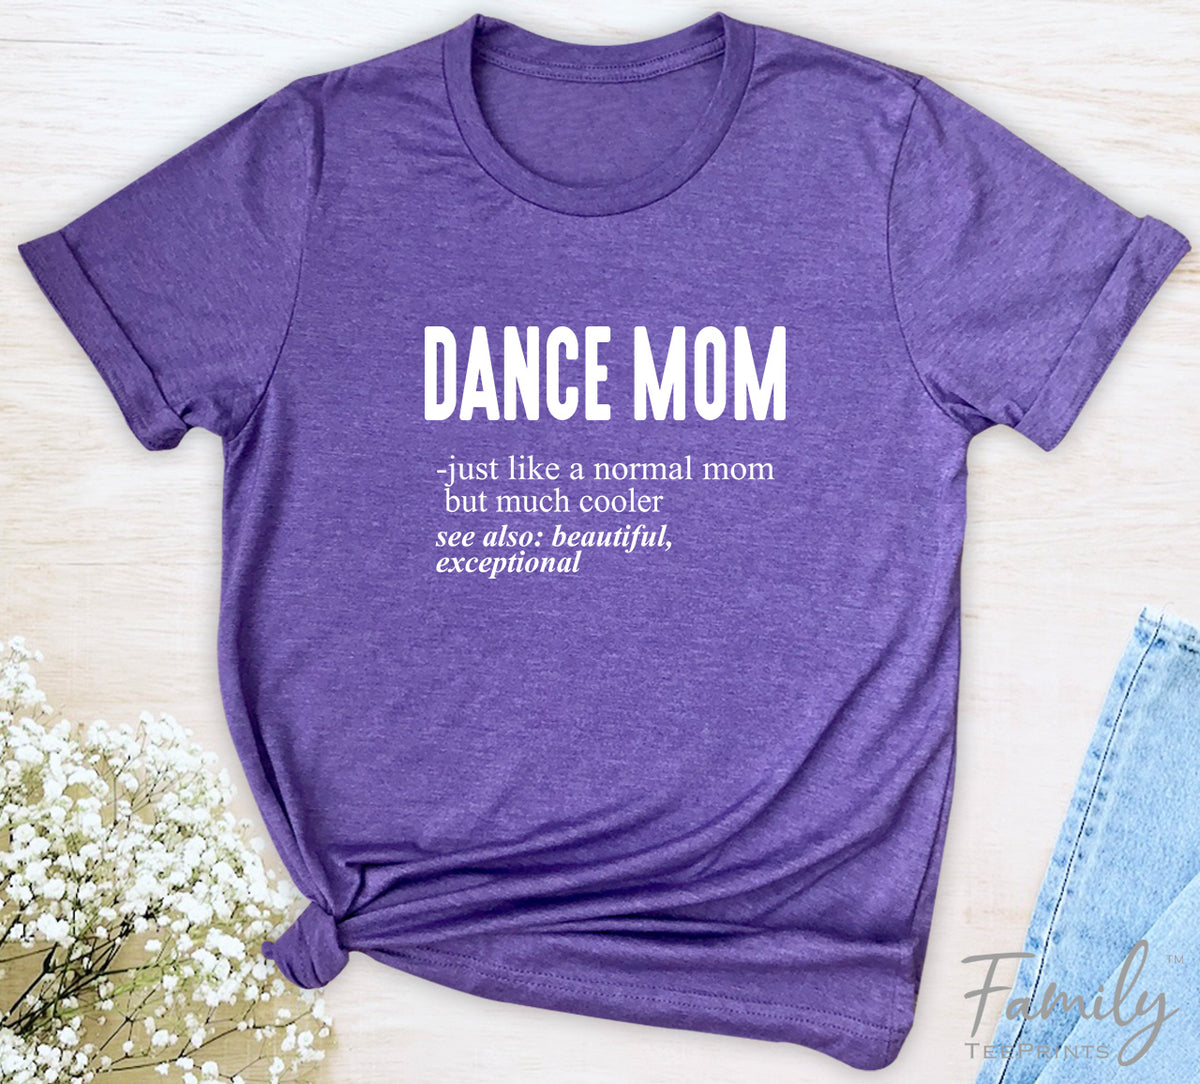 Dance Mom Just Like A Normal Mom - Unisex T-shirt - Dance Mom Shirt - Gift For Dance Mom - familyteeprints